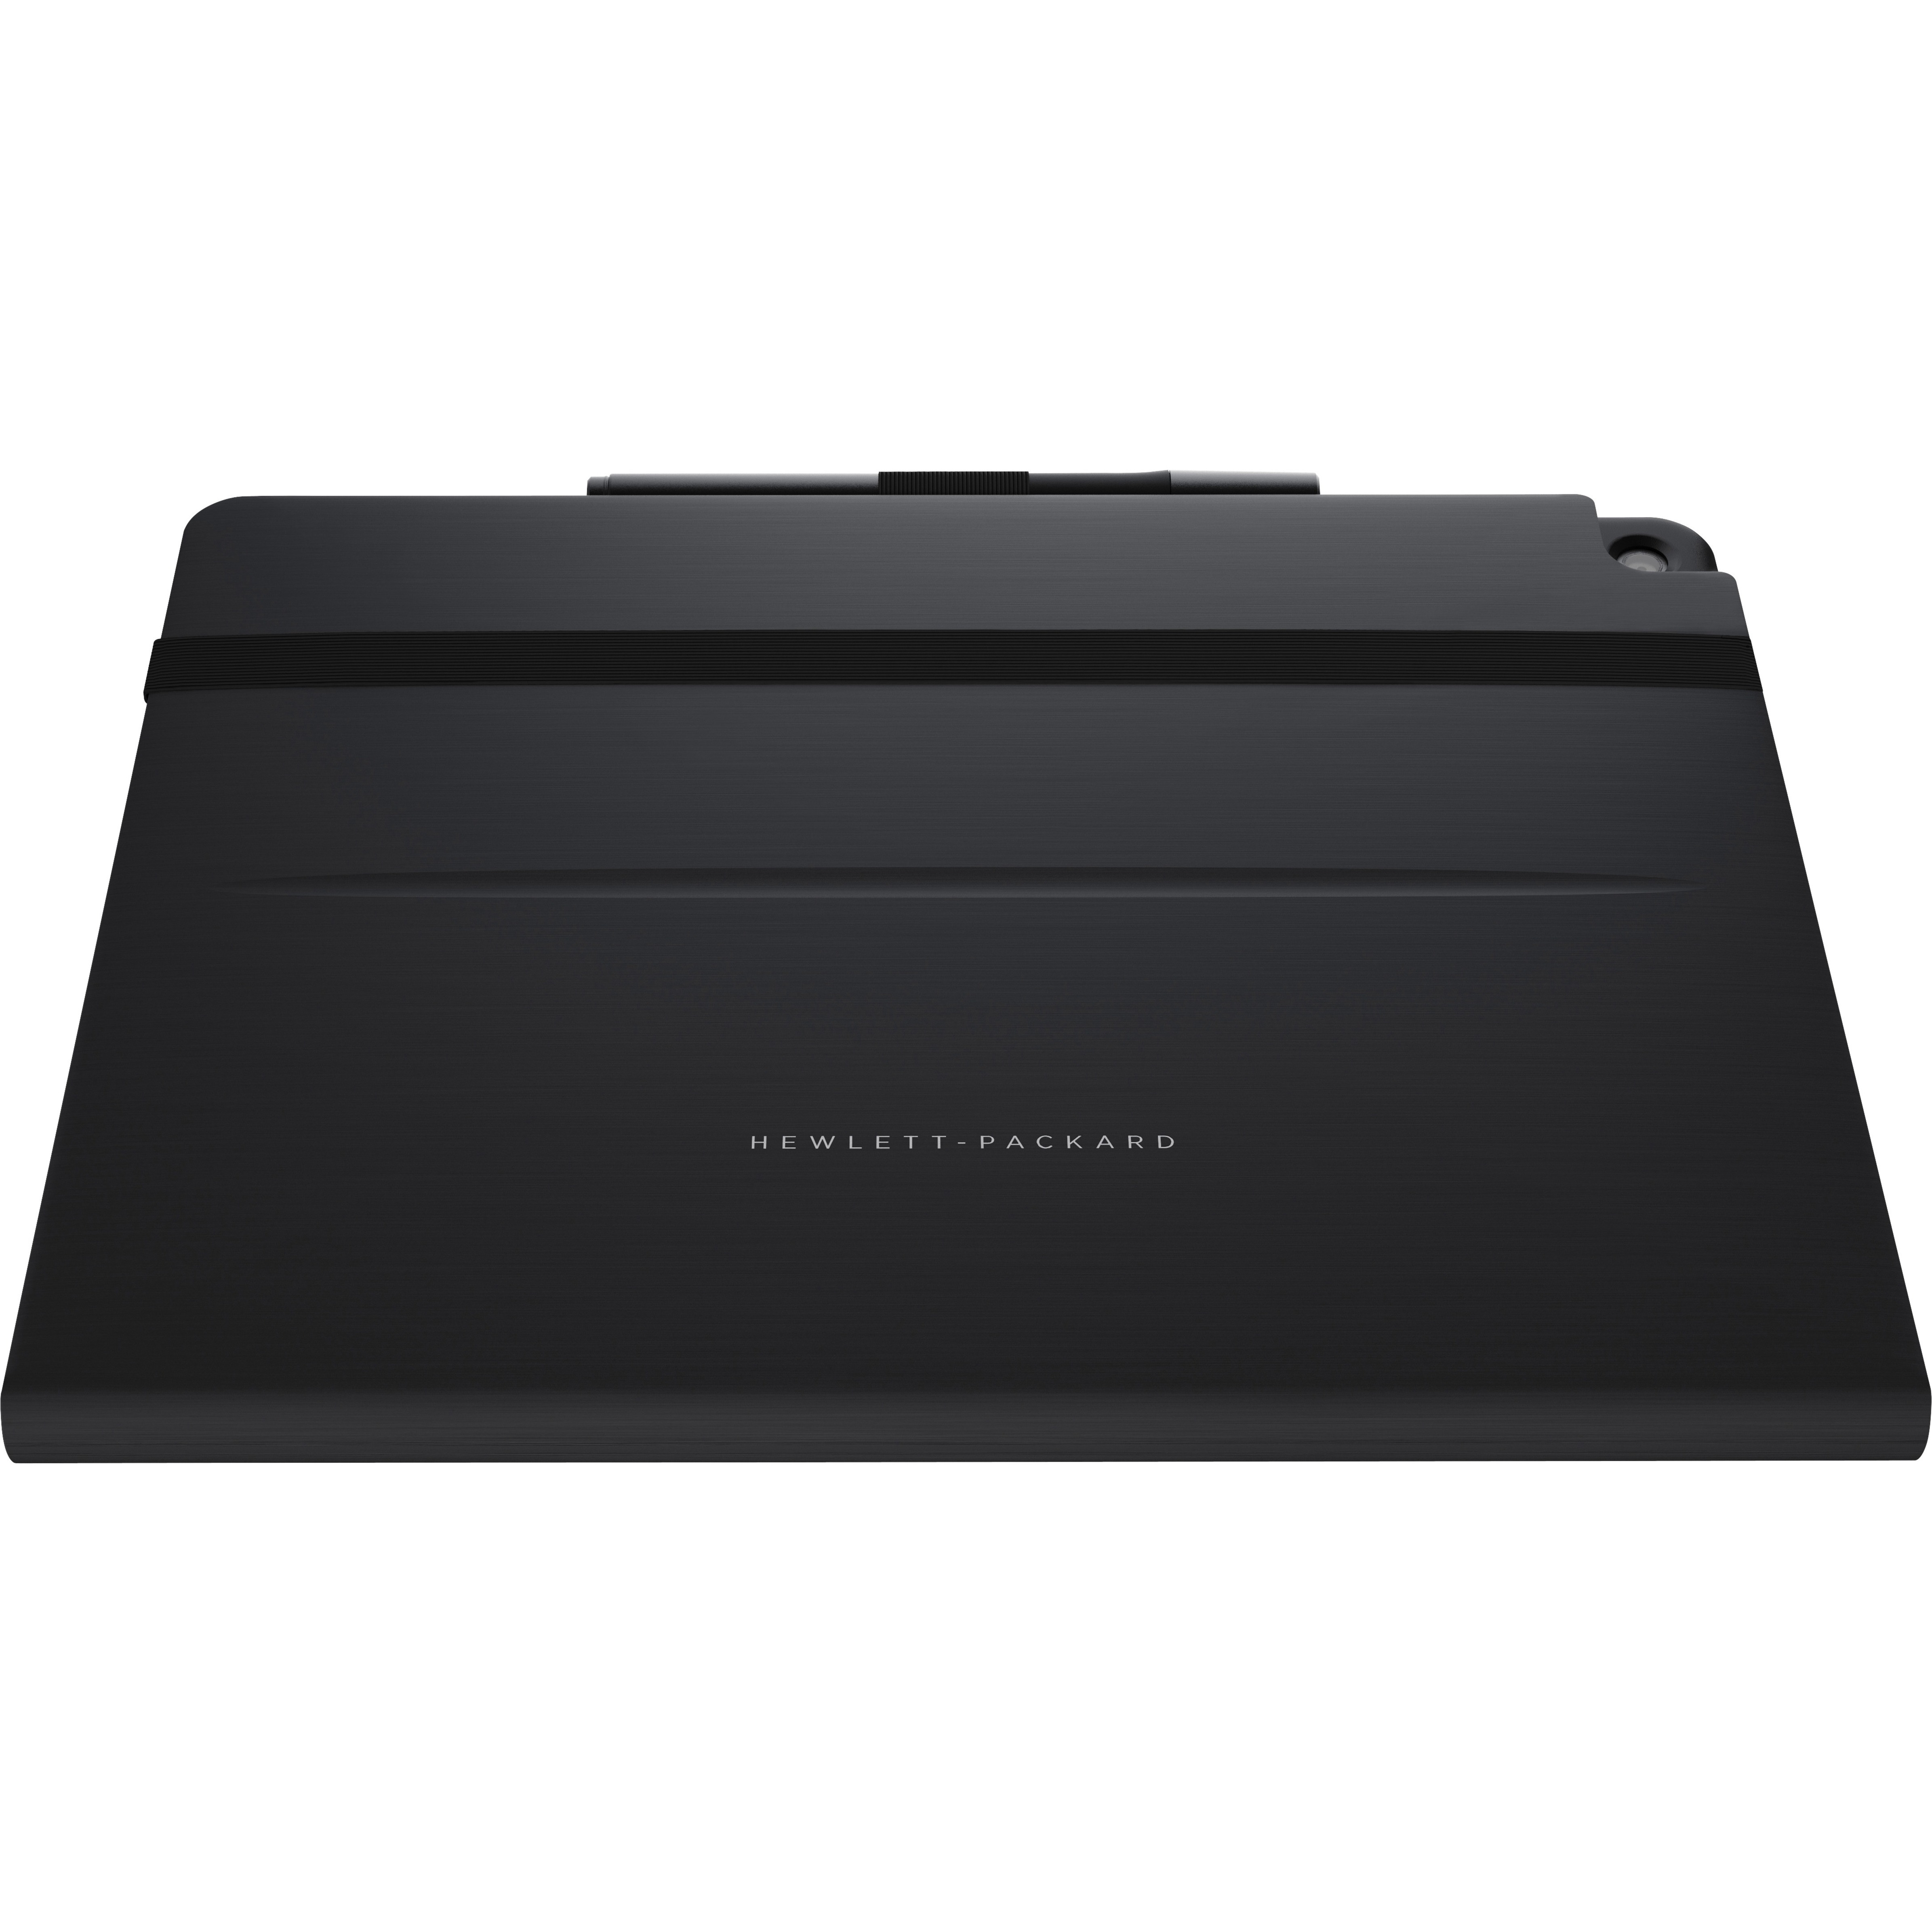 HP Carrying Case Tablet, Black - image 1 of 2